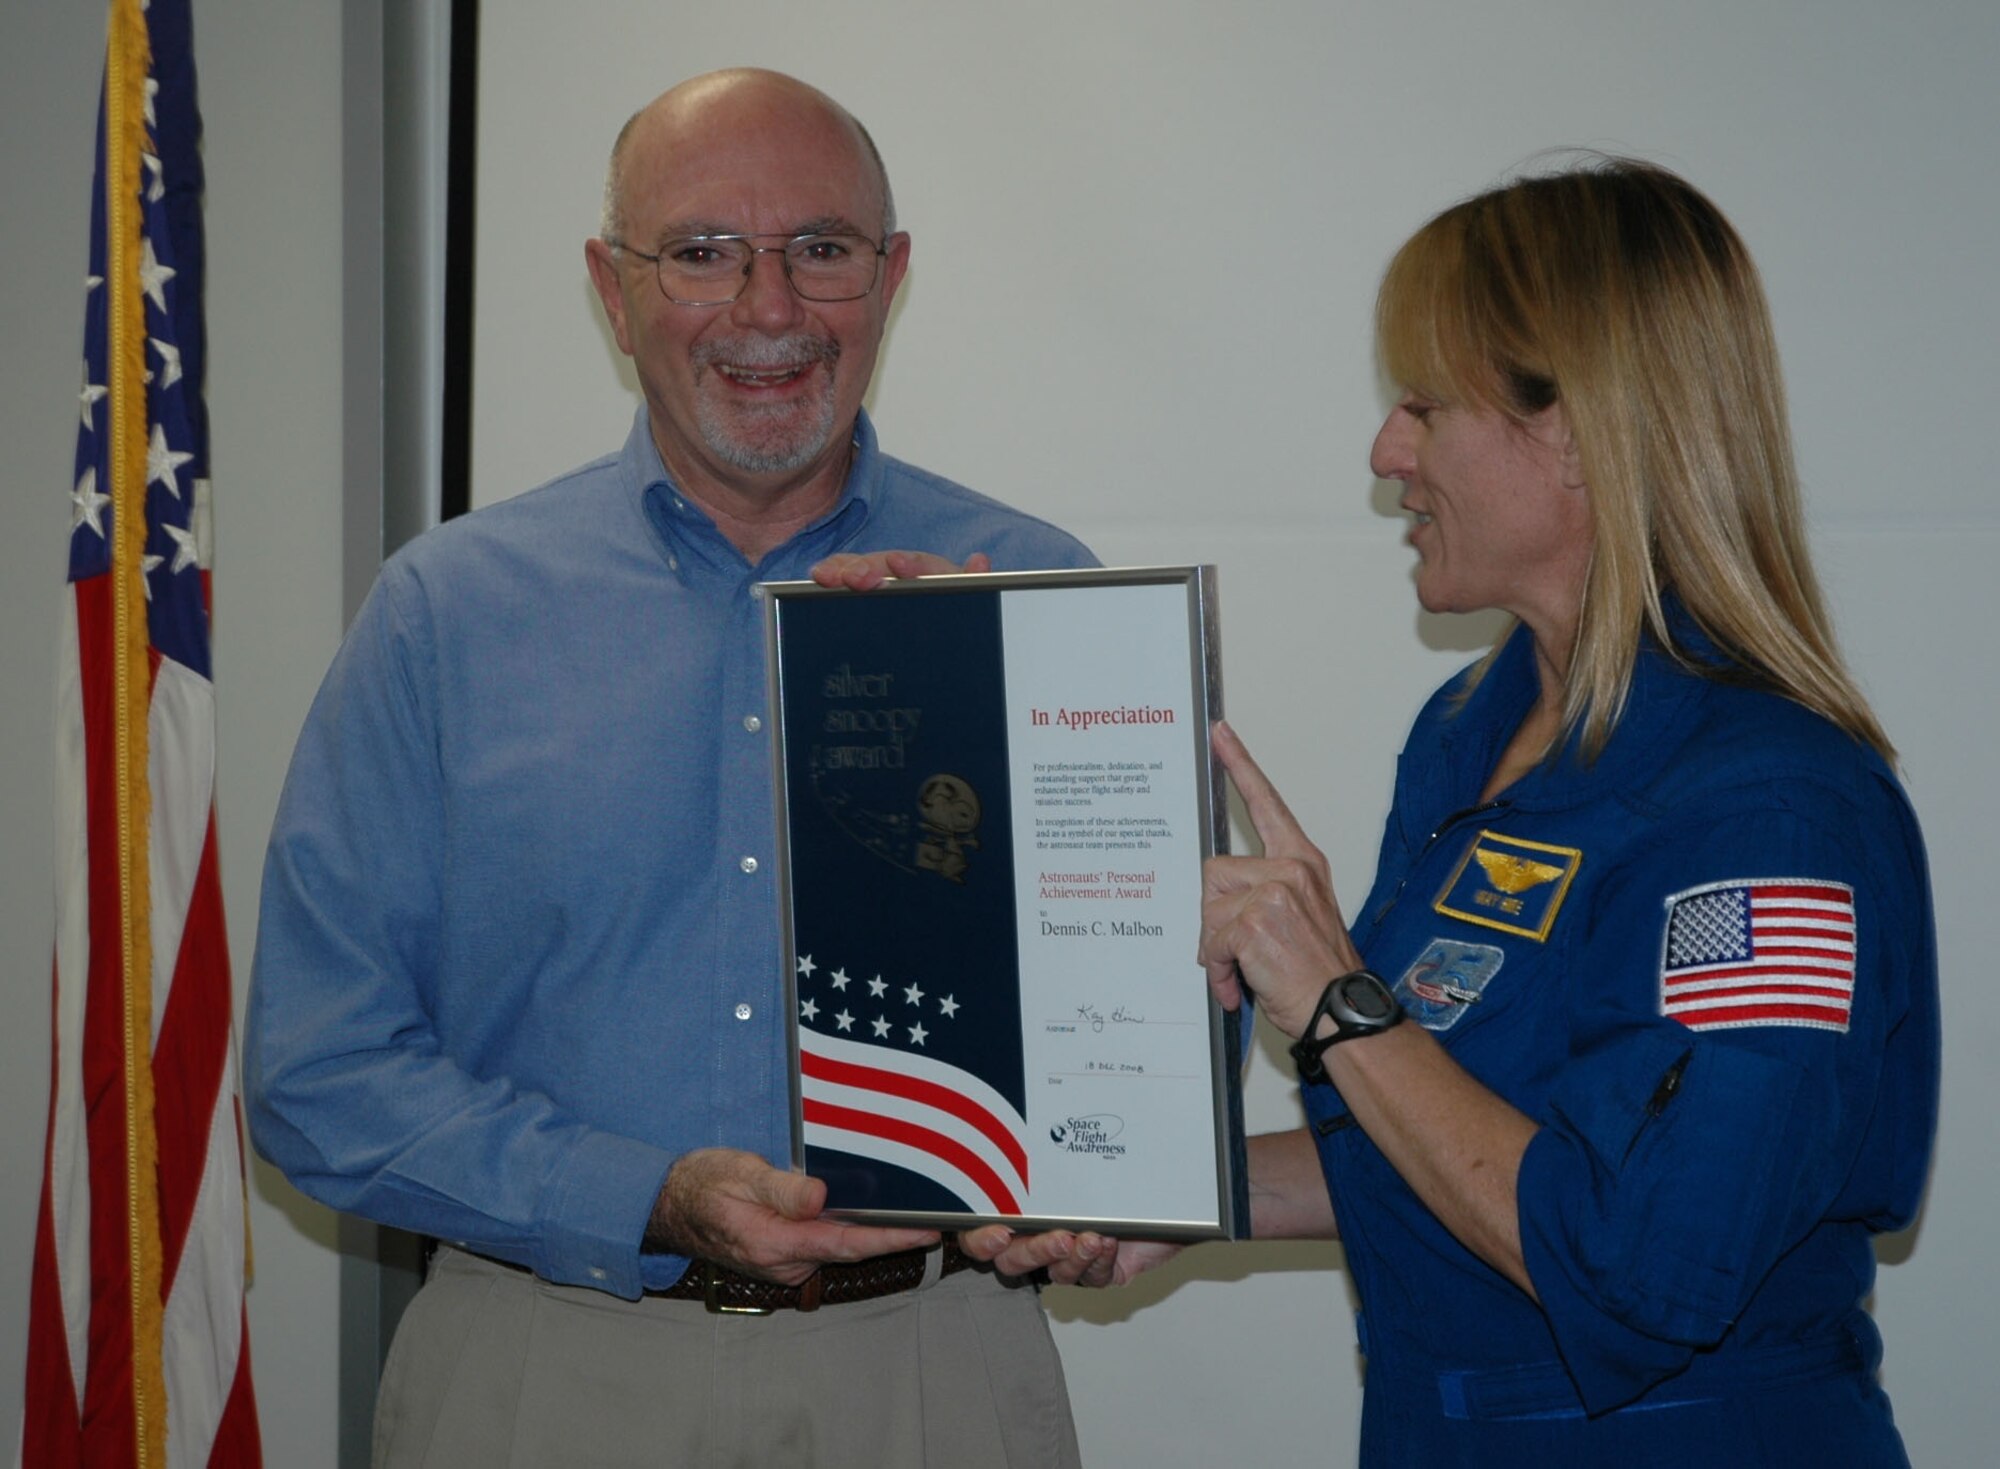 Chris Malbon accepts his Silver Snoopy award for a lifetime of service to the space program from Astronaut Kay Hire Dec. 19.